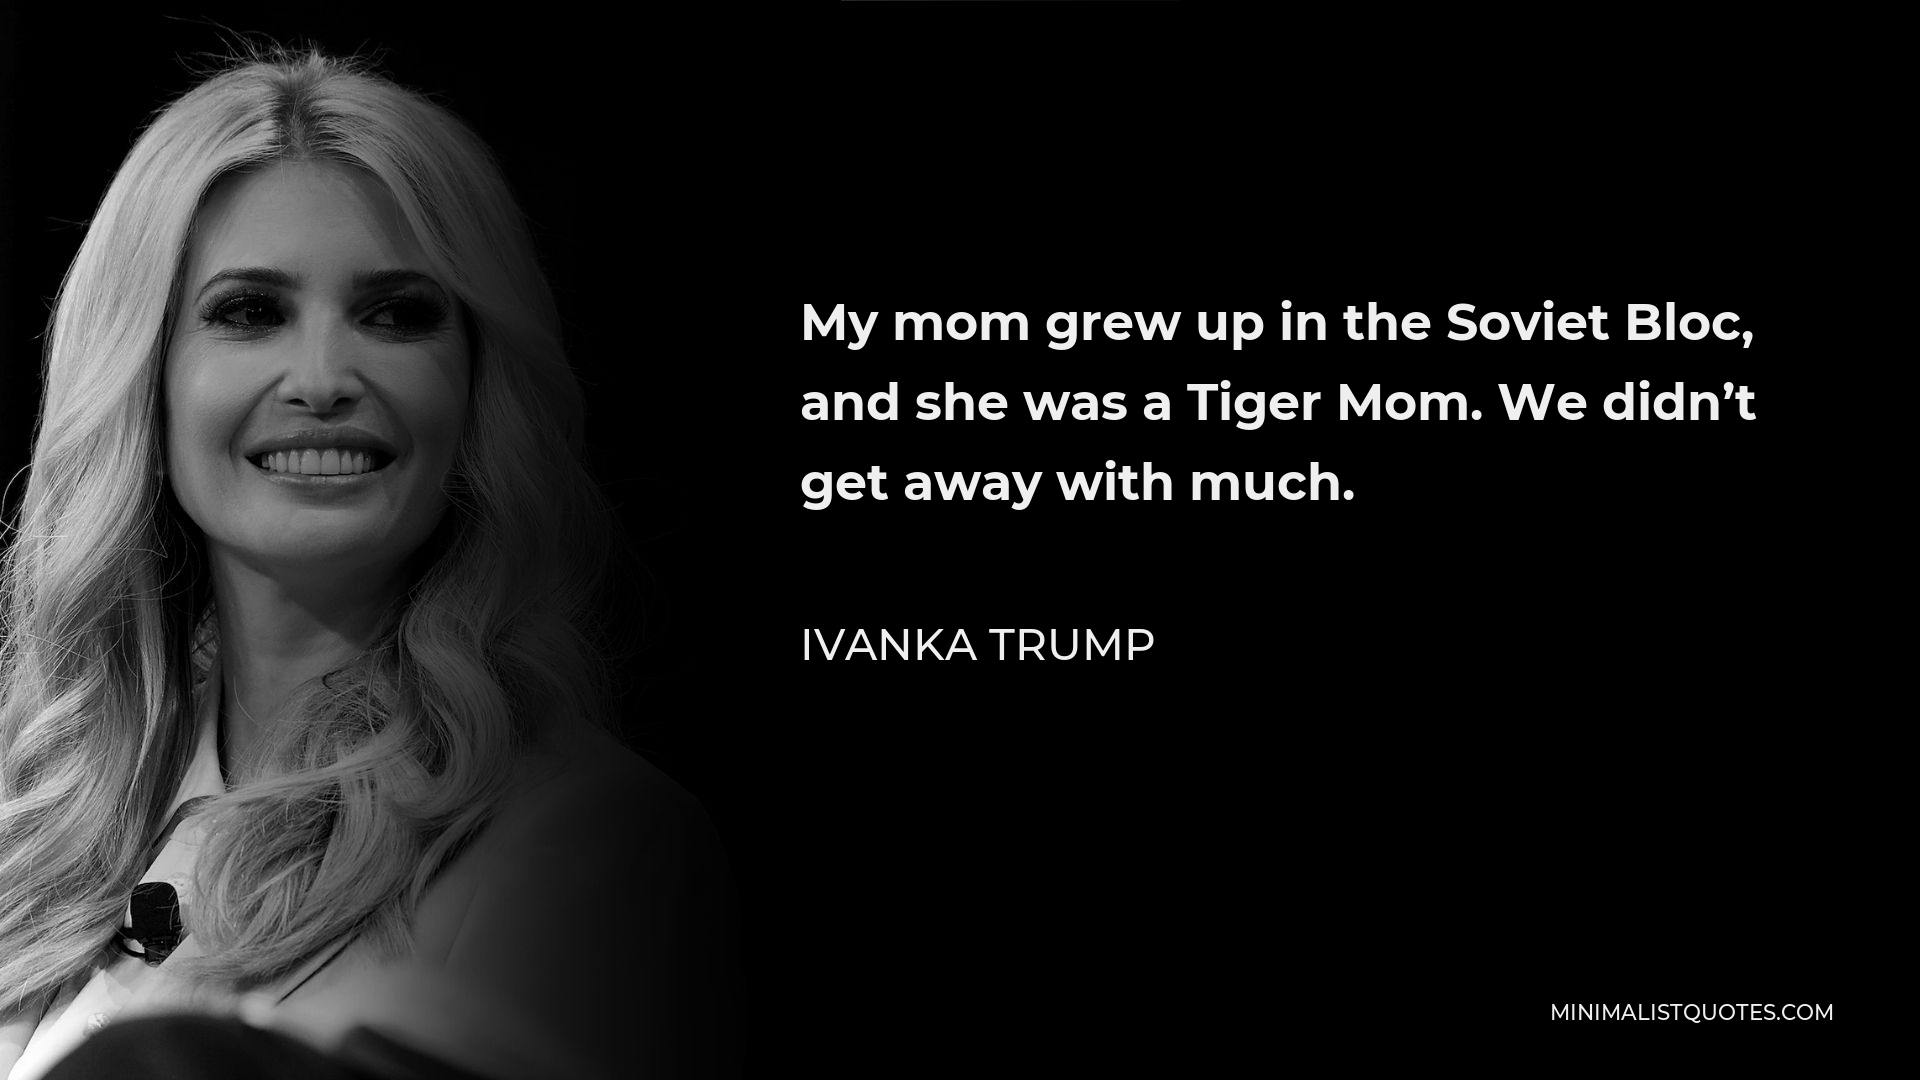 Ivanka Trump Quote - My mom grew up in the Soviet Bloc, and she was a Tiger Mom. We didn’t get away with much.